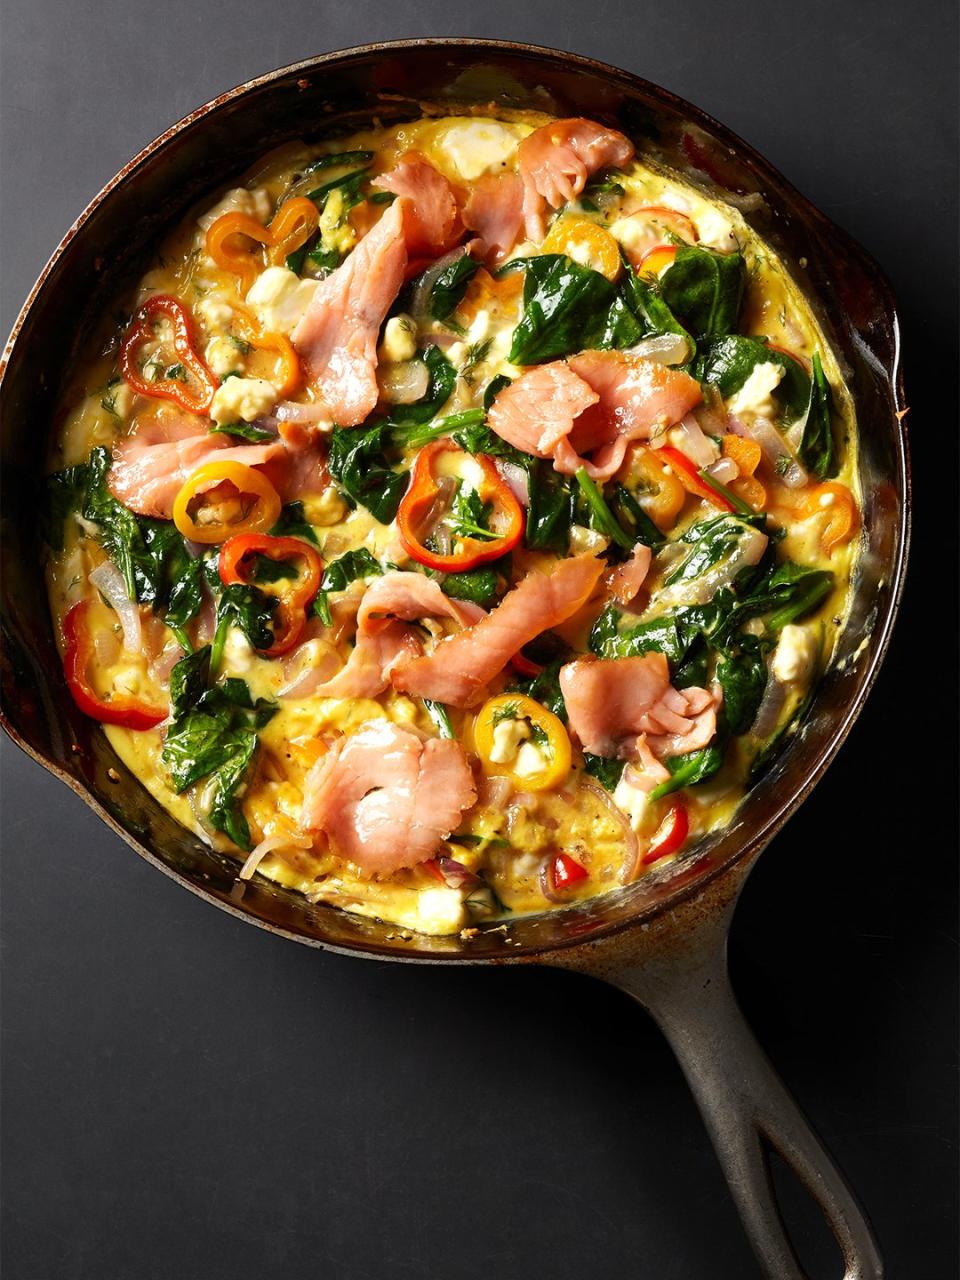 Wish healthy breakfast recipes could be speedier? Your wish is our command. These quick breakfast recipes come together in half an hour or less and feature healthy items such as frittata recipes, breakfast smoothies, egg sandwiches, and more. We even have a few trendy options like healthy smoothie bowls and breakfast salad.